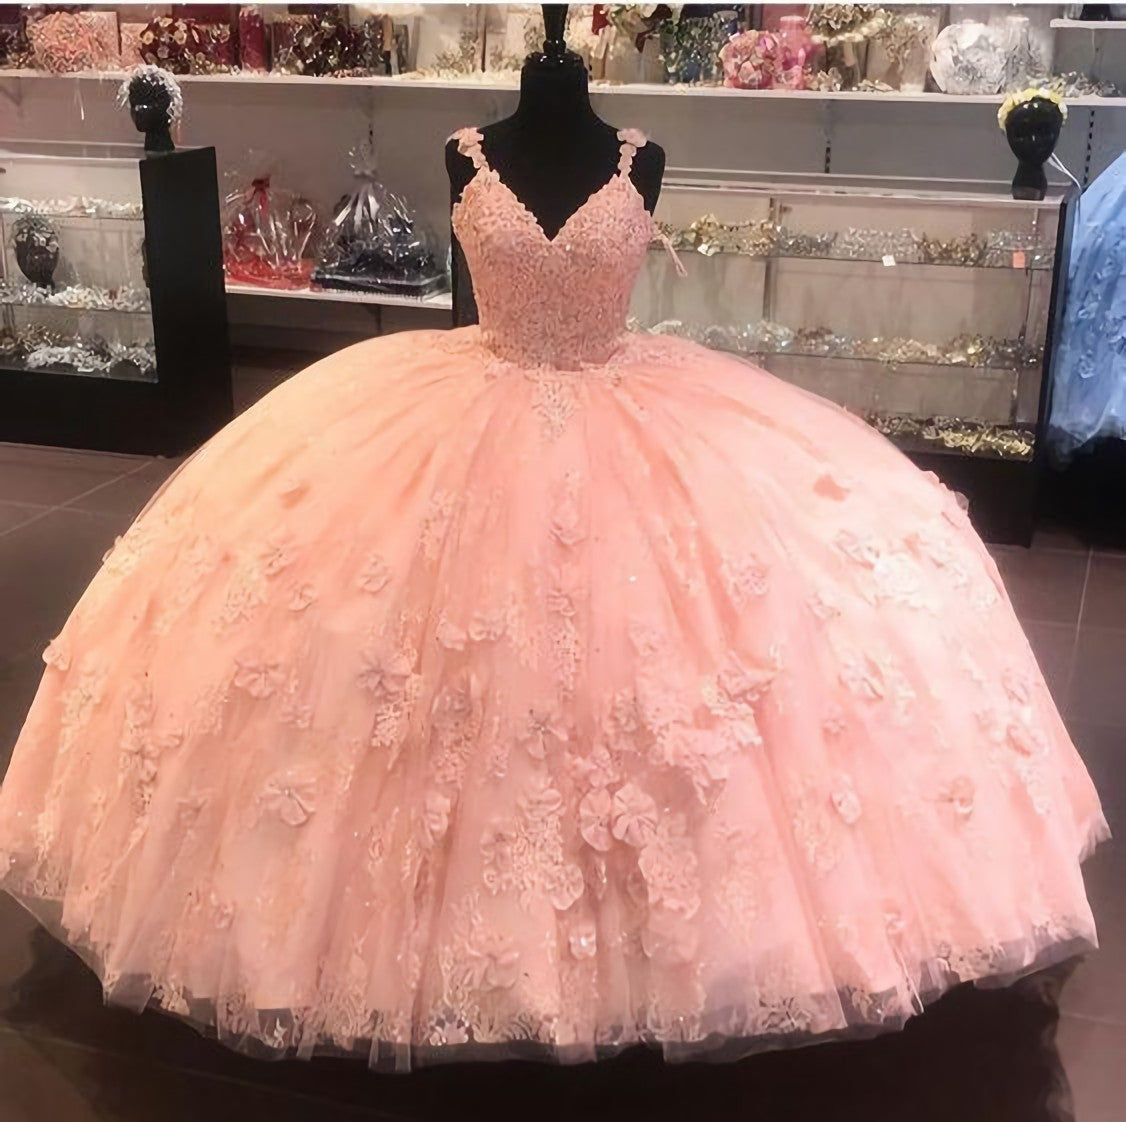 Party Dress Dress Up, Pink Long Prom Dress, Ball Gown Prom Dresses